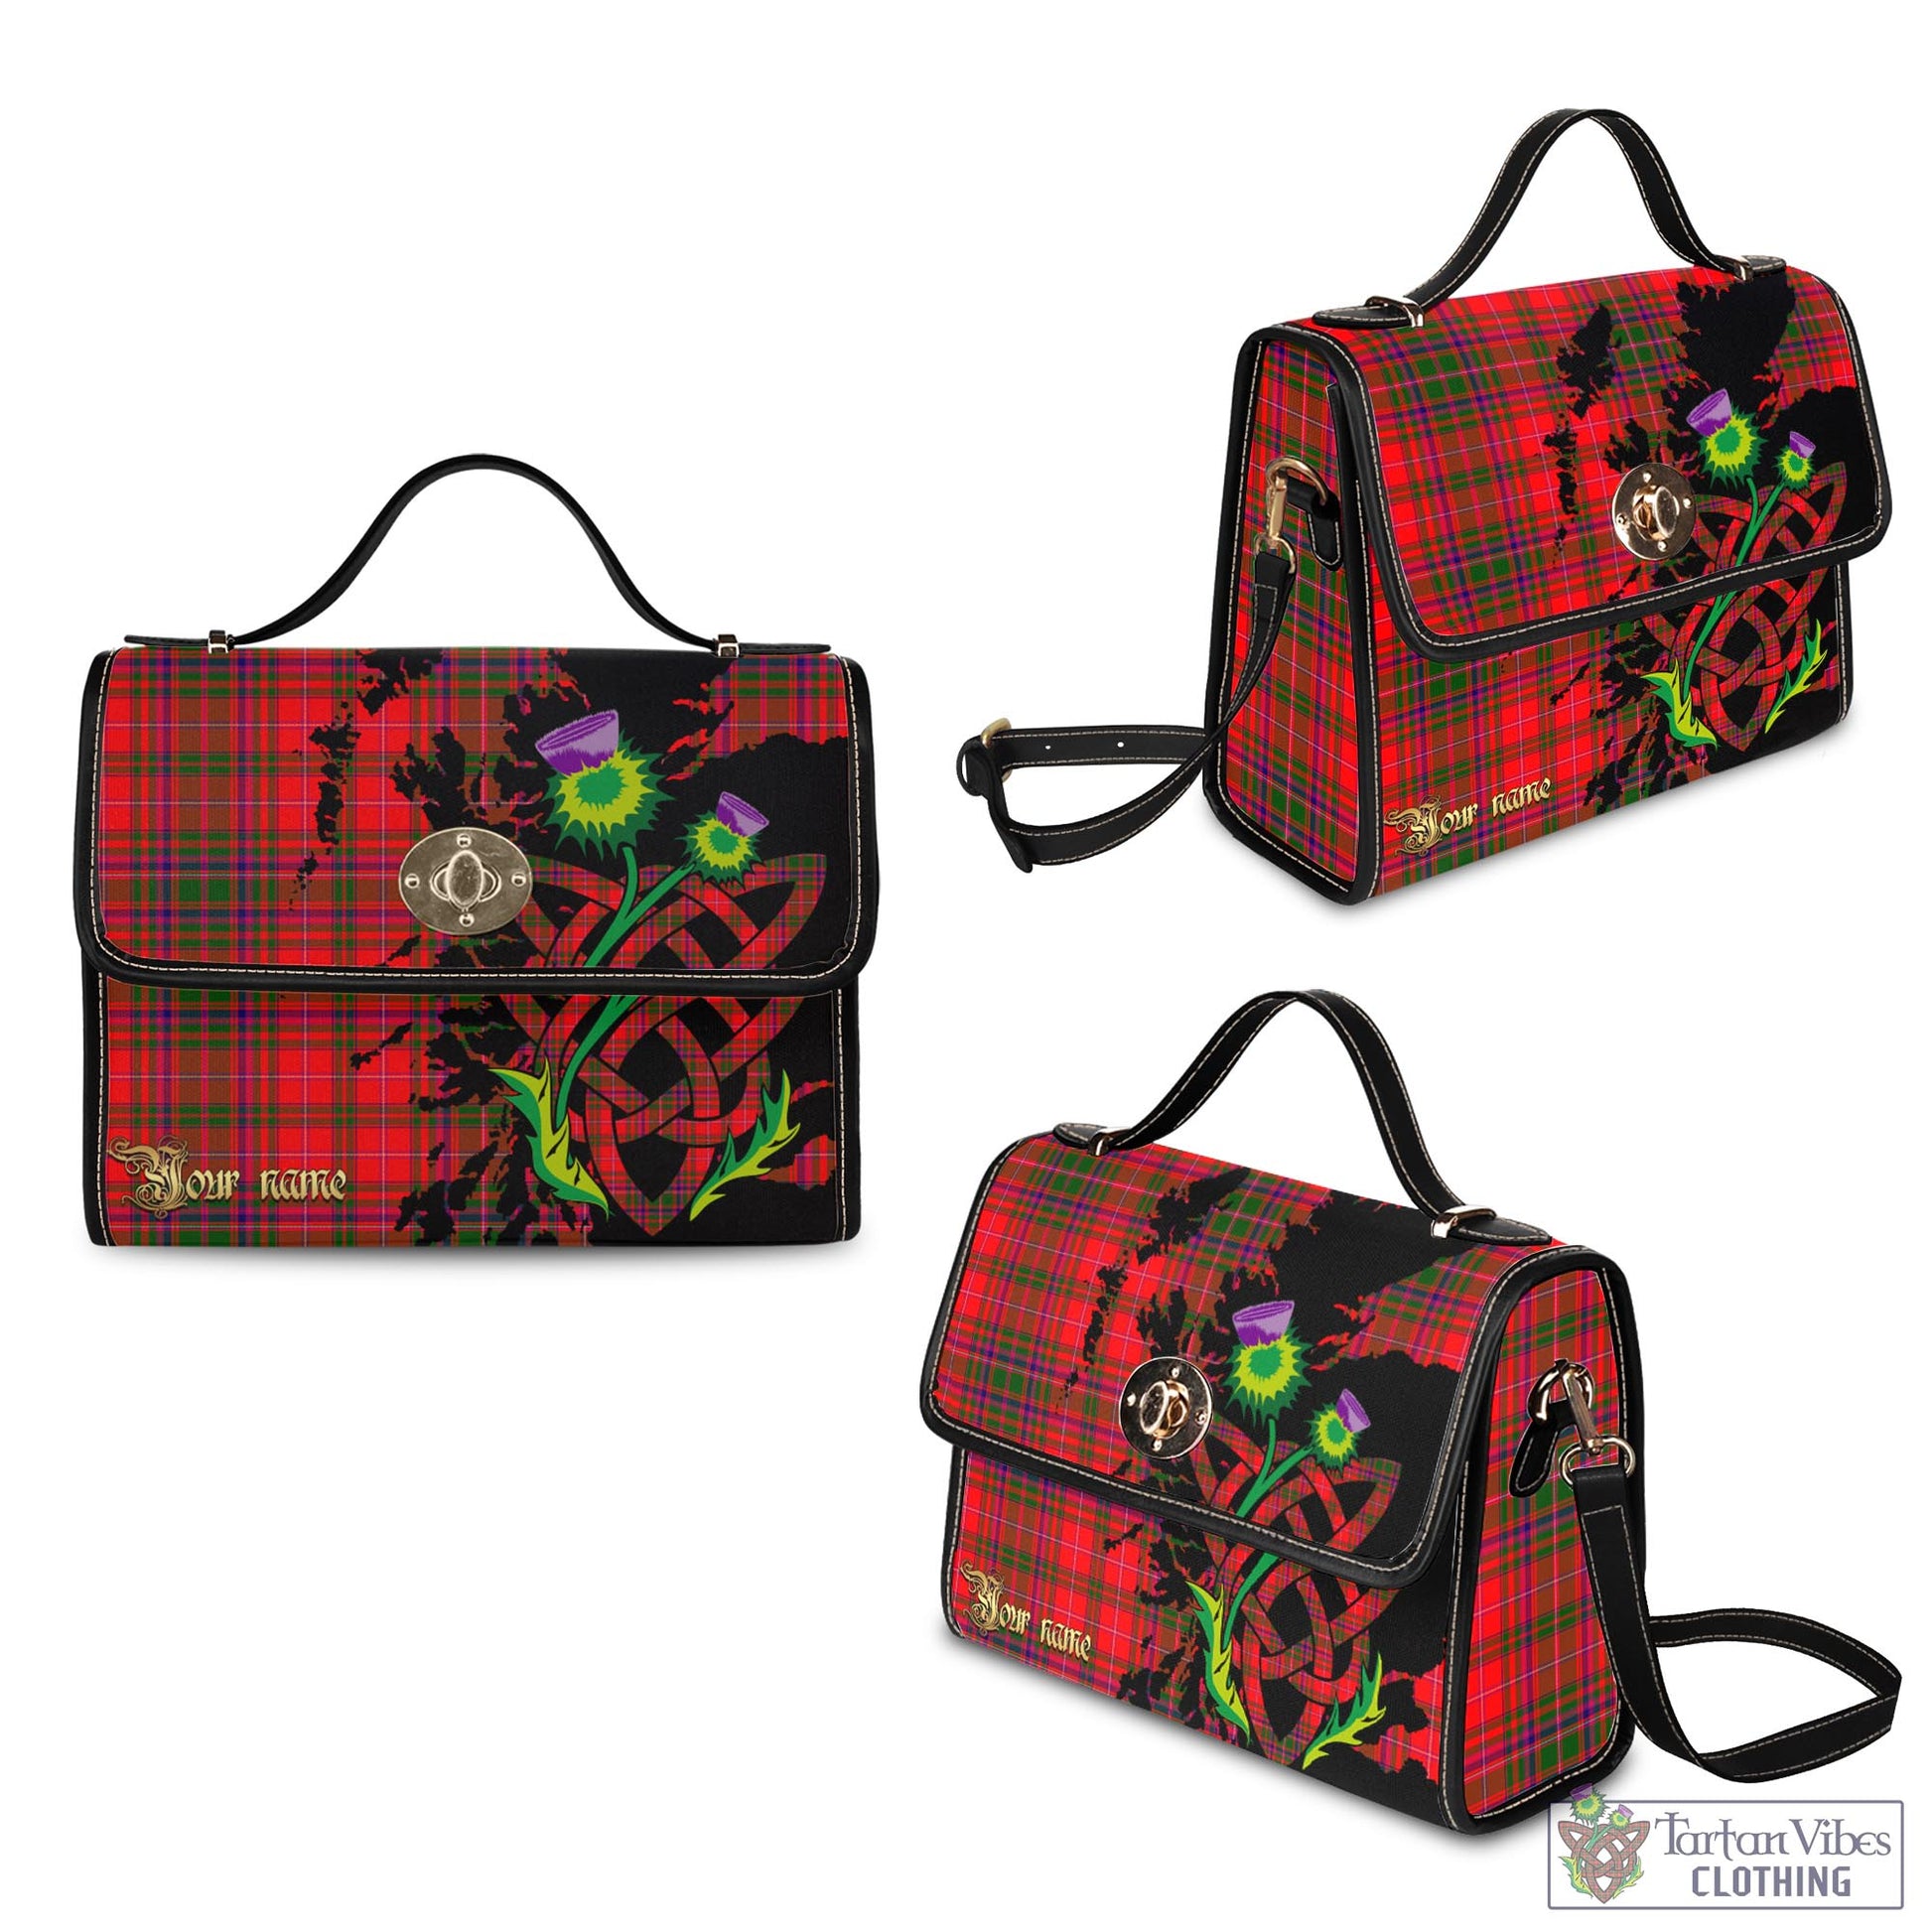 Tartan Vibes Clothing MacDougall Modern Tartan Waterproof Canvas Bag with Scotland Map and Thistle Celtic Accents